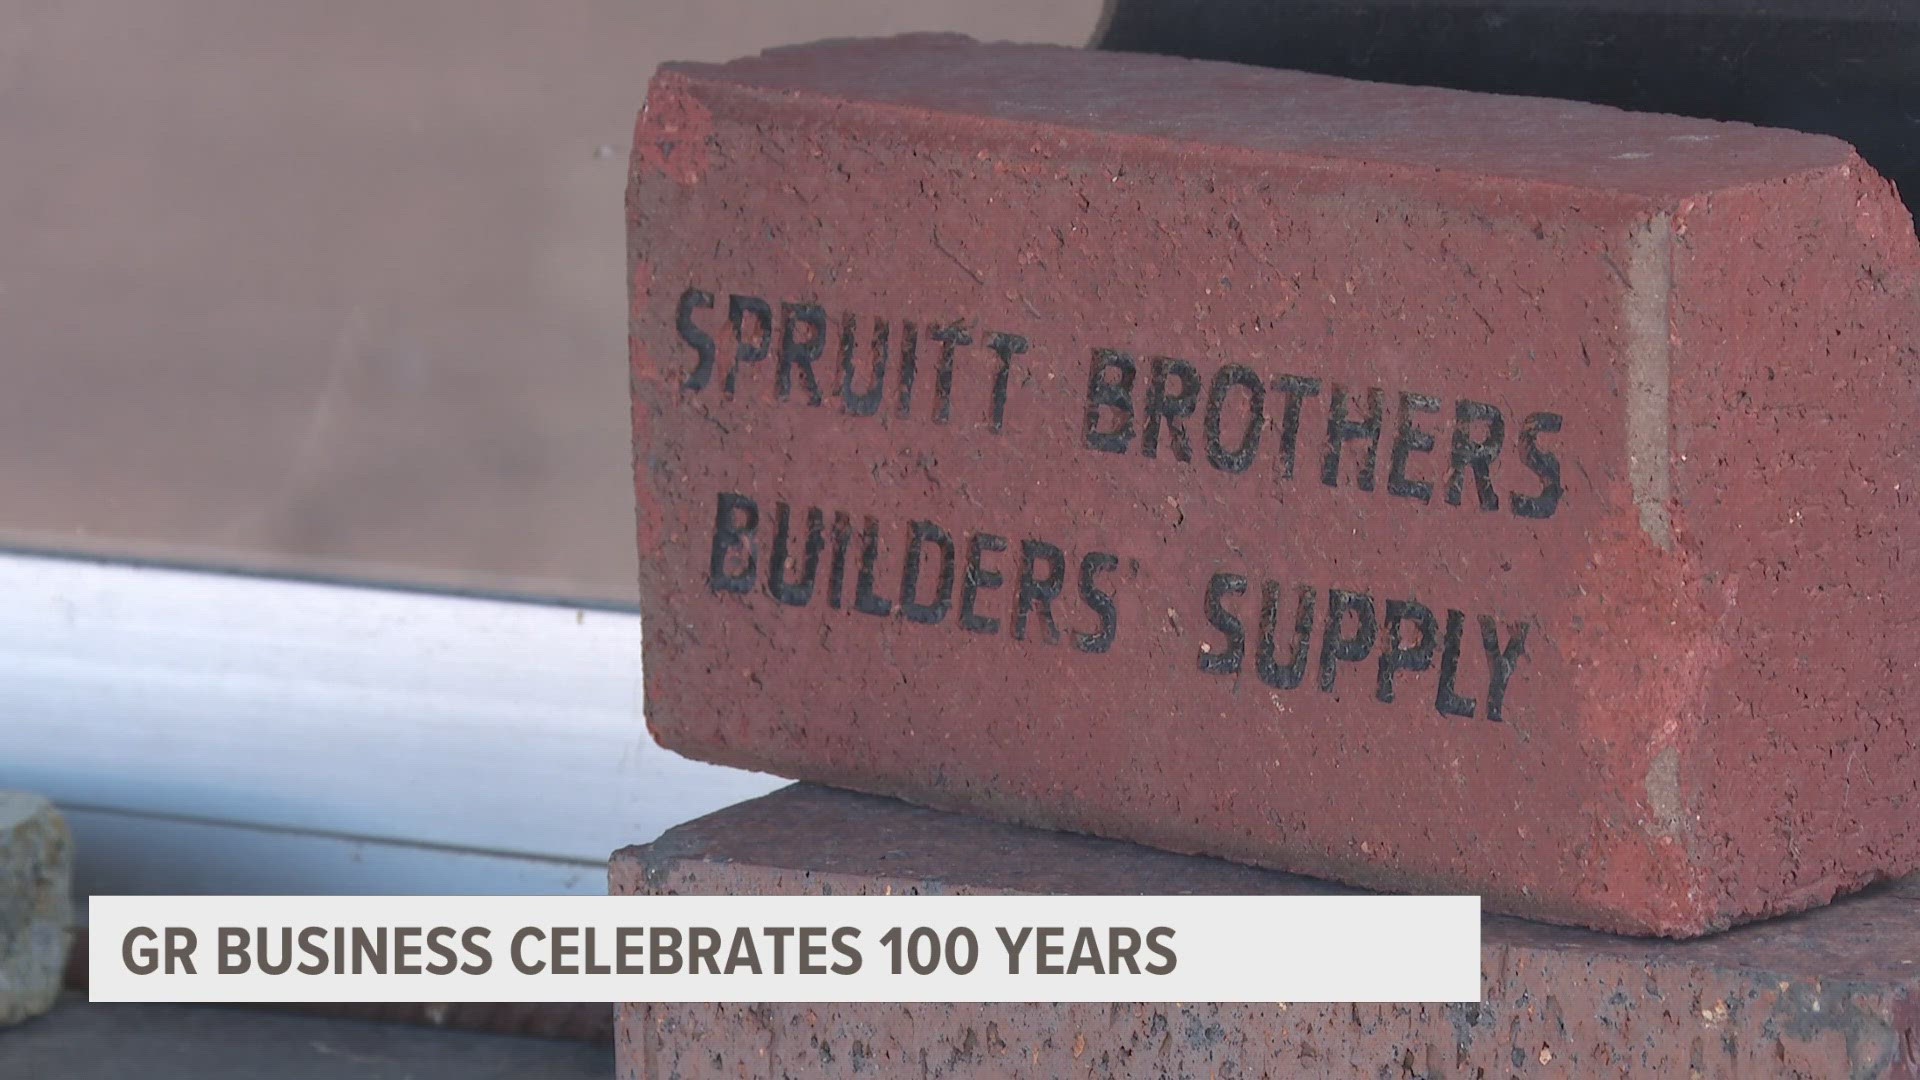 The family owned business is celebrating 100 years.